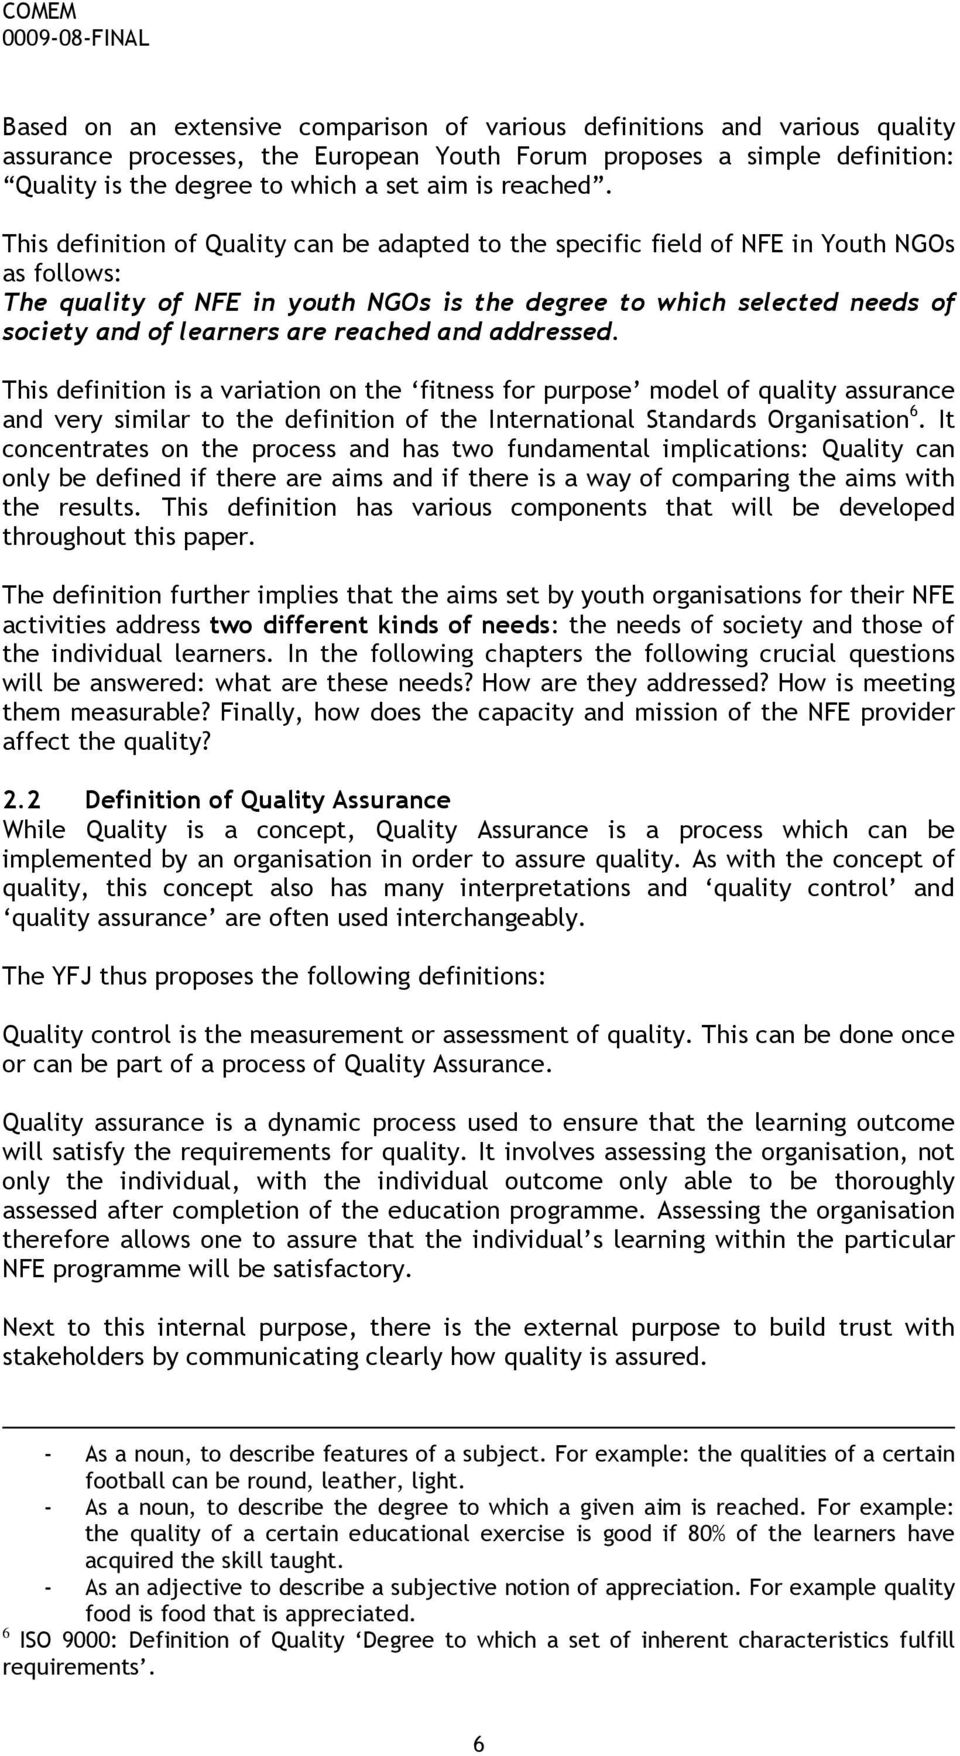 This definition of Quality can be adapted to the specific field of NFE in Youth NGOs as follows: The quality of NFE in youth NGOs is the degree to which selected needs of society and of learners are